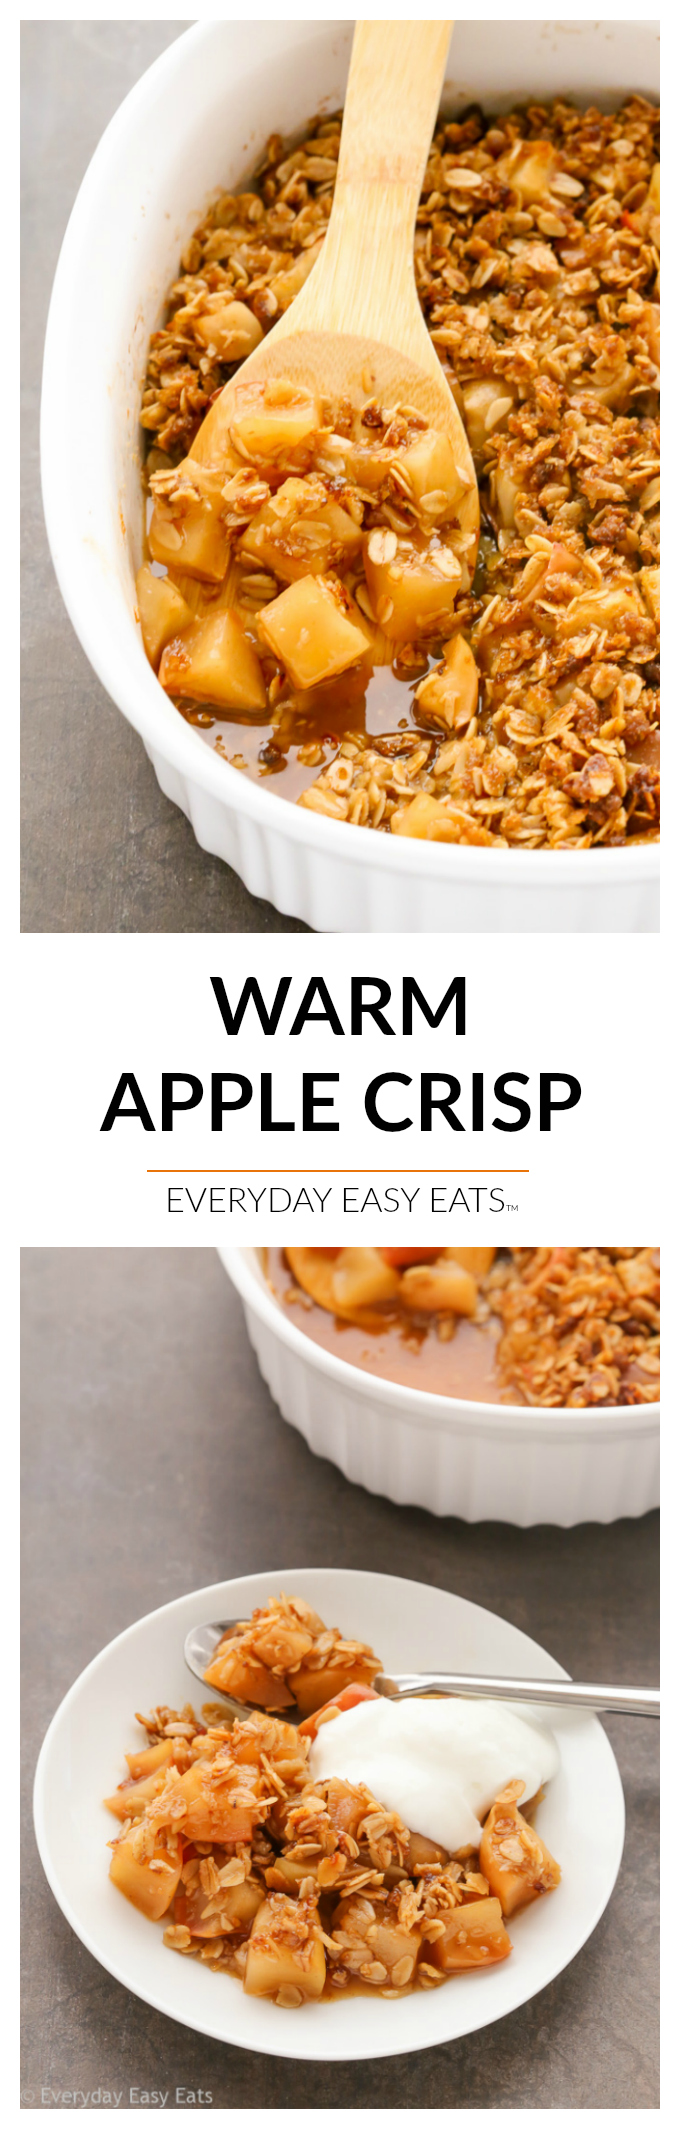 This Easy Gluten-Free Apple Crisp recipe is made with tender, juicy apples under a crunchy, flourless brown sugar-oat topping. The best apple crisp recipe ever!| EverydayEasyEats.com